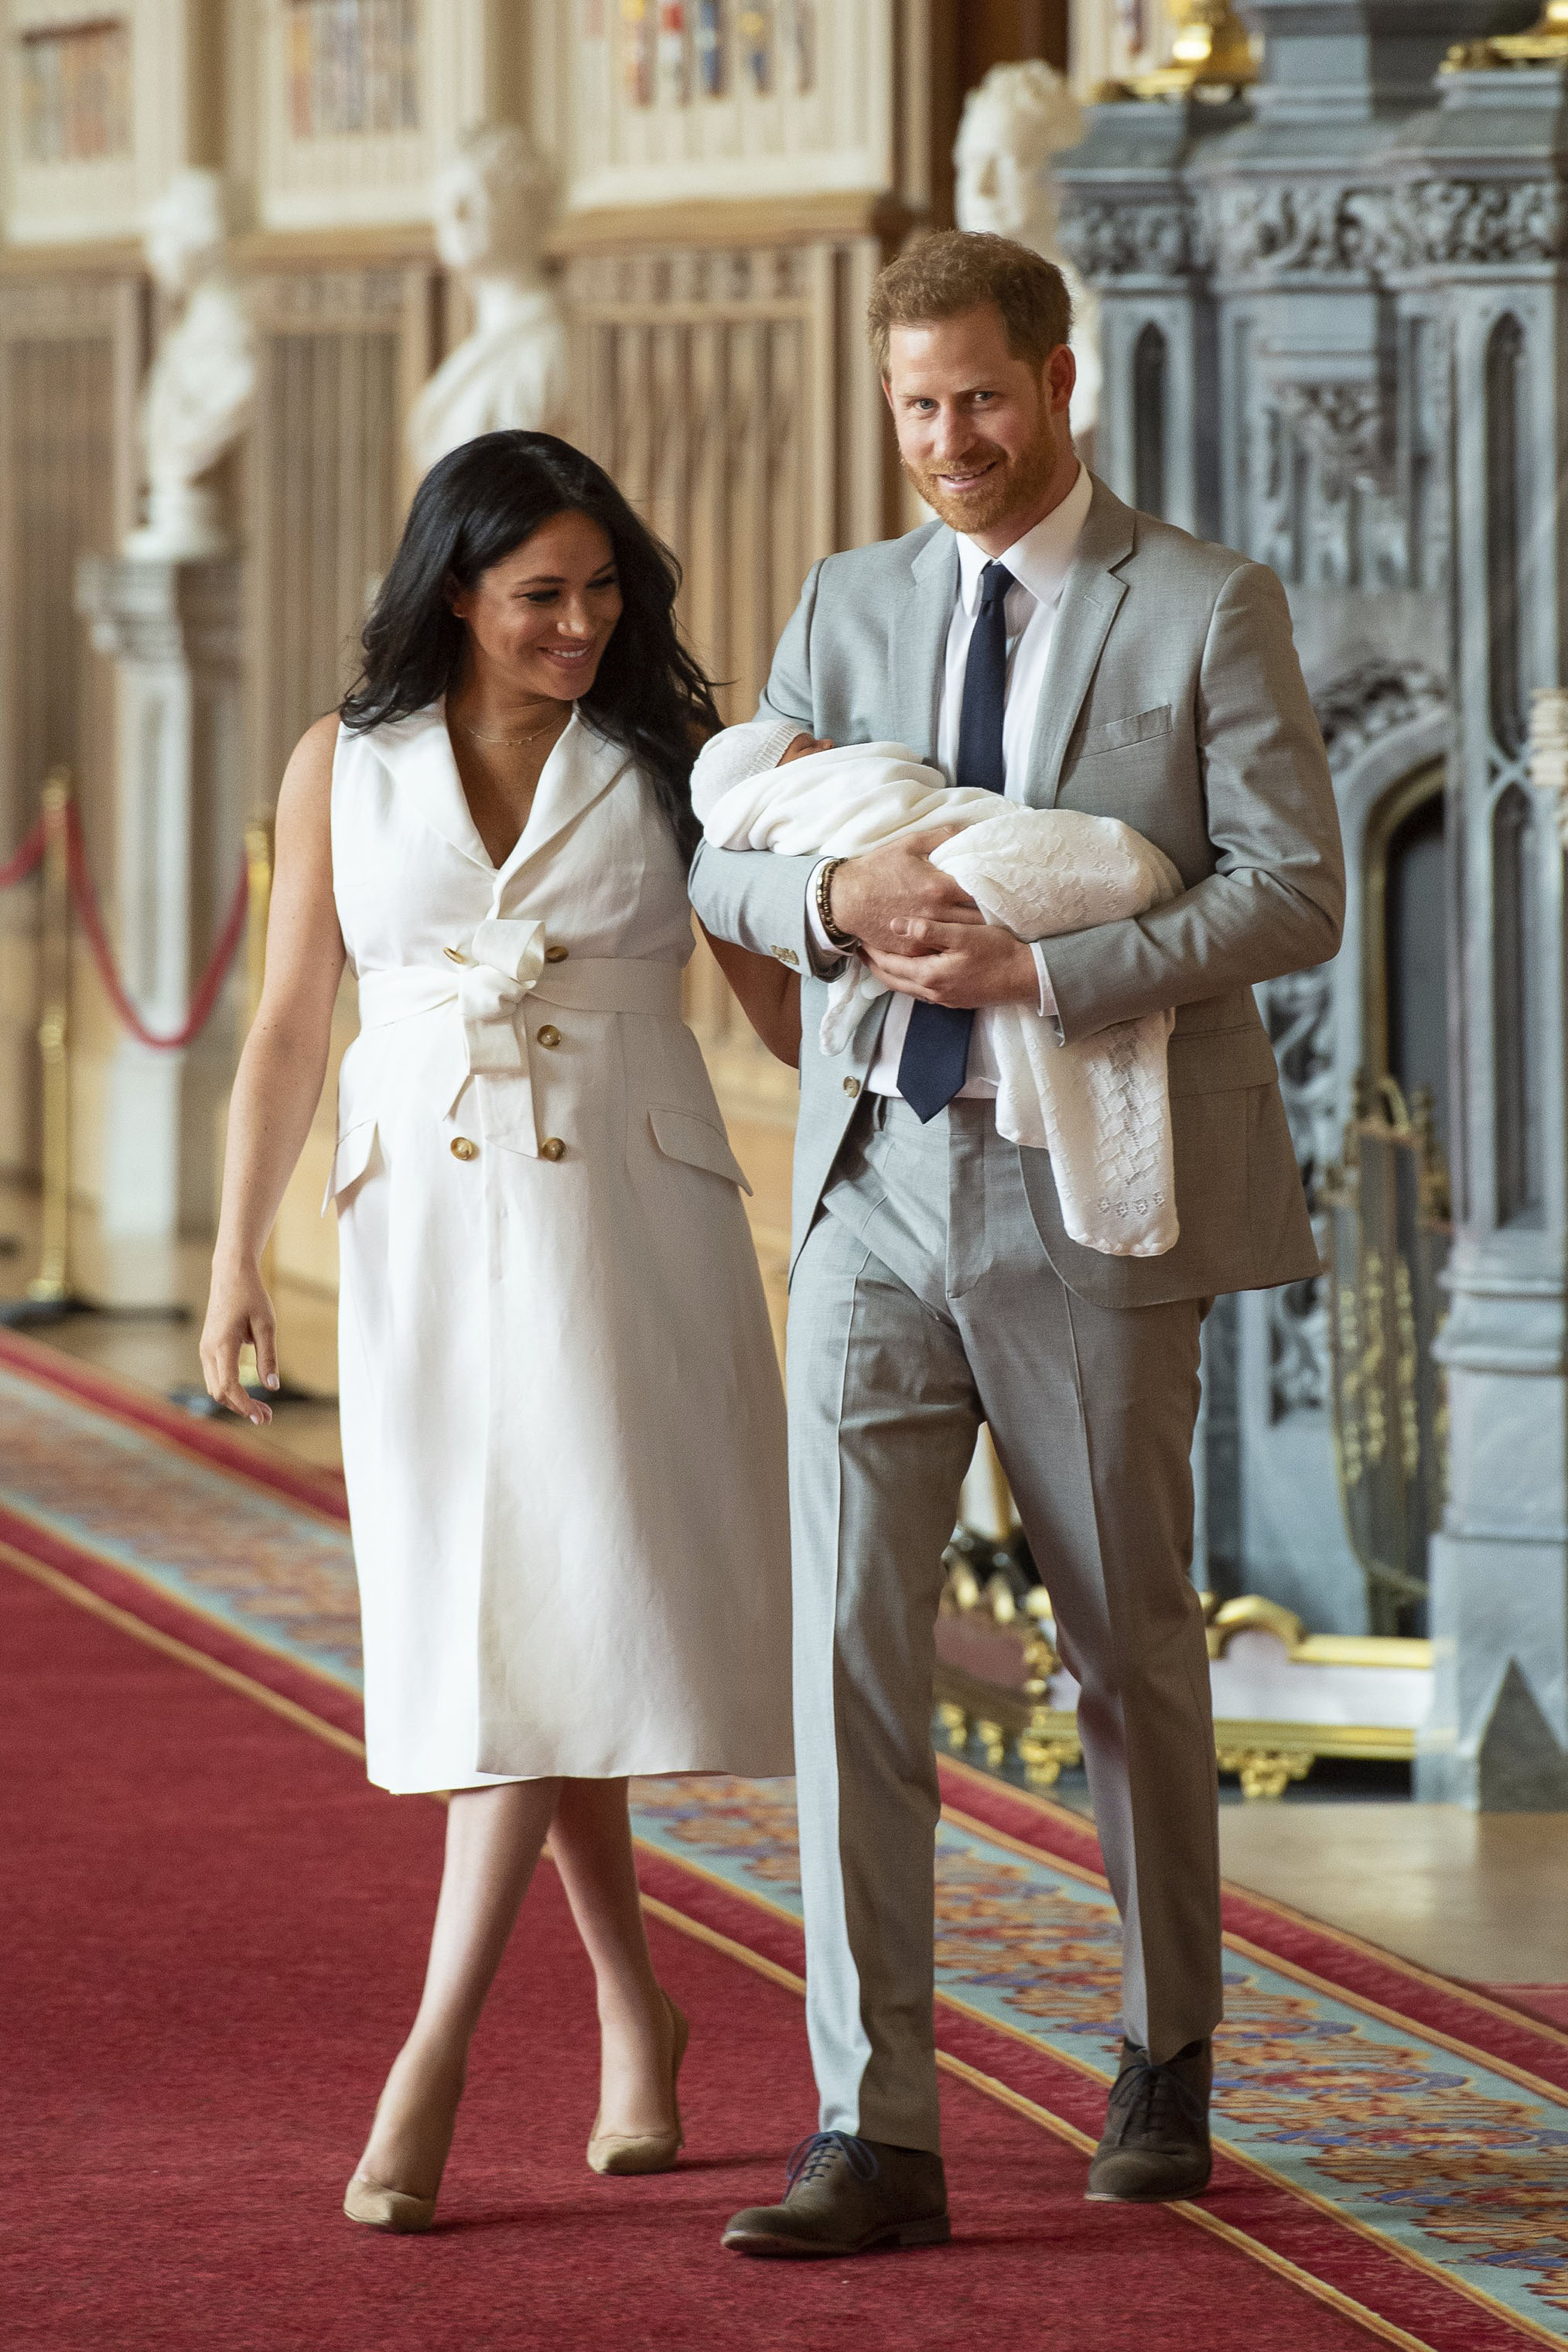 Meghan Markle Name Royal Baby Boy Archie The Latest News Time,United Airlines Baggage Rules Basic Economy